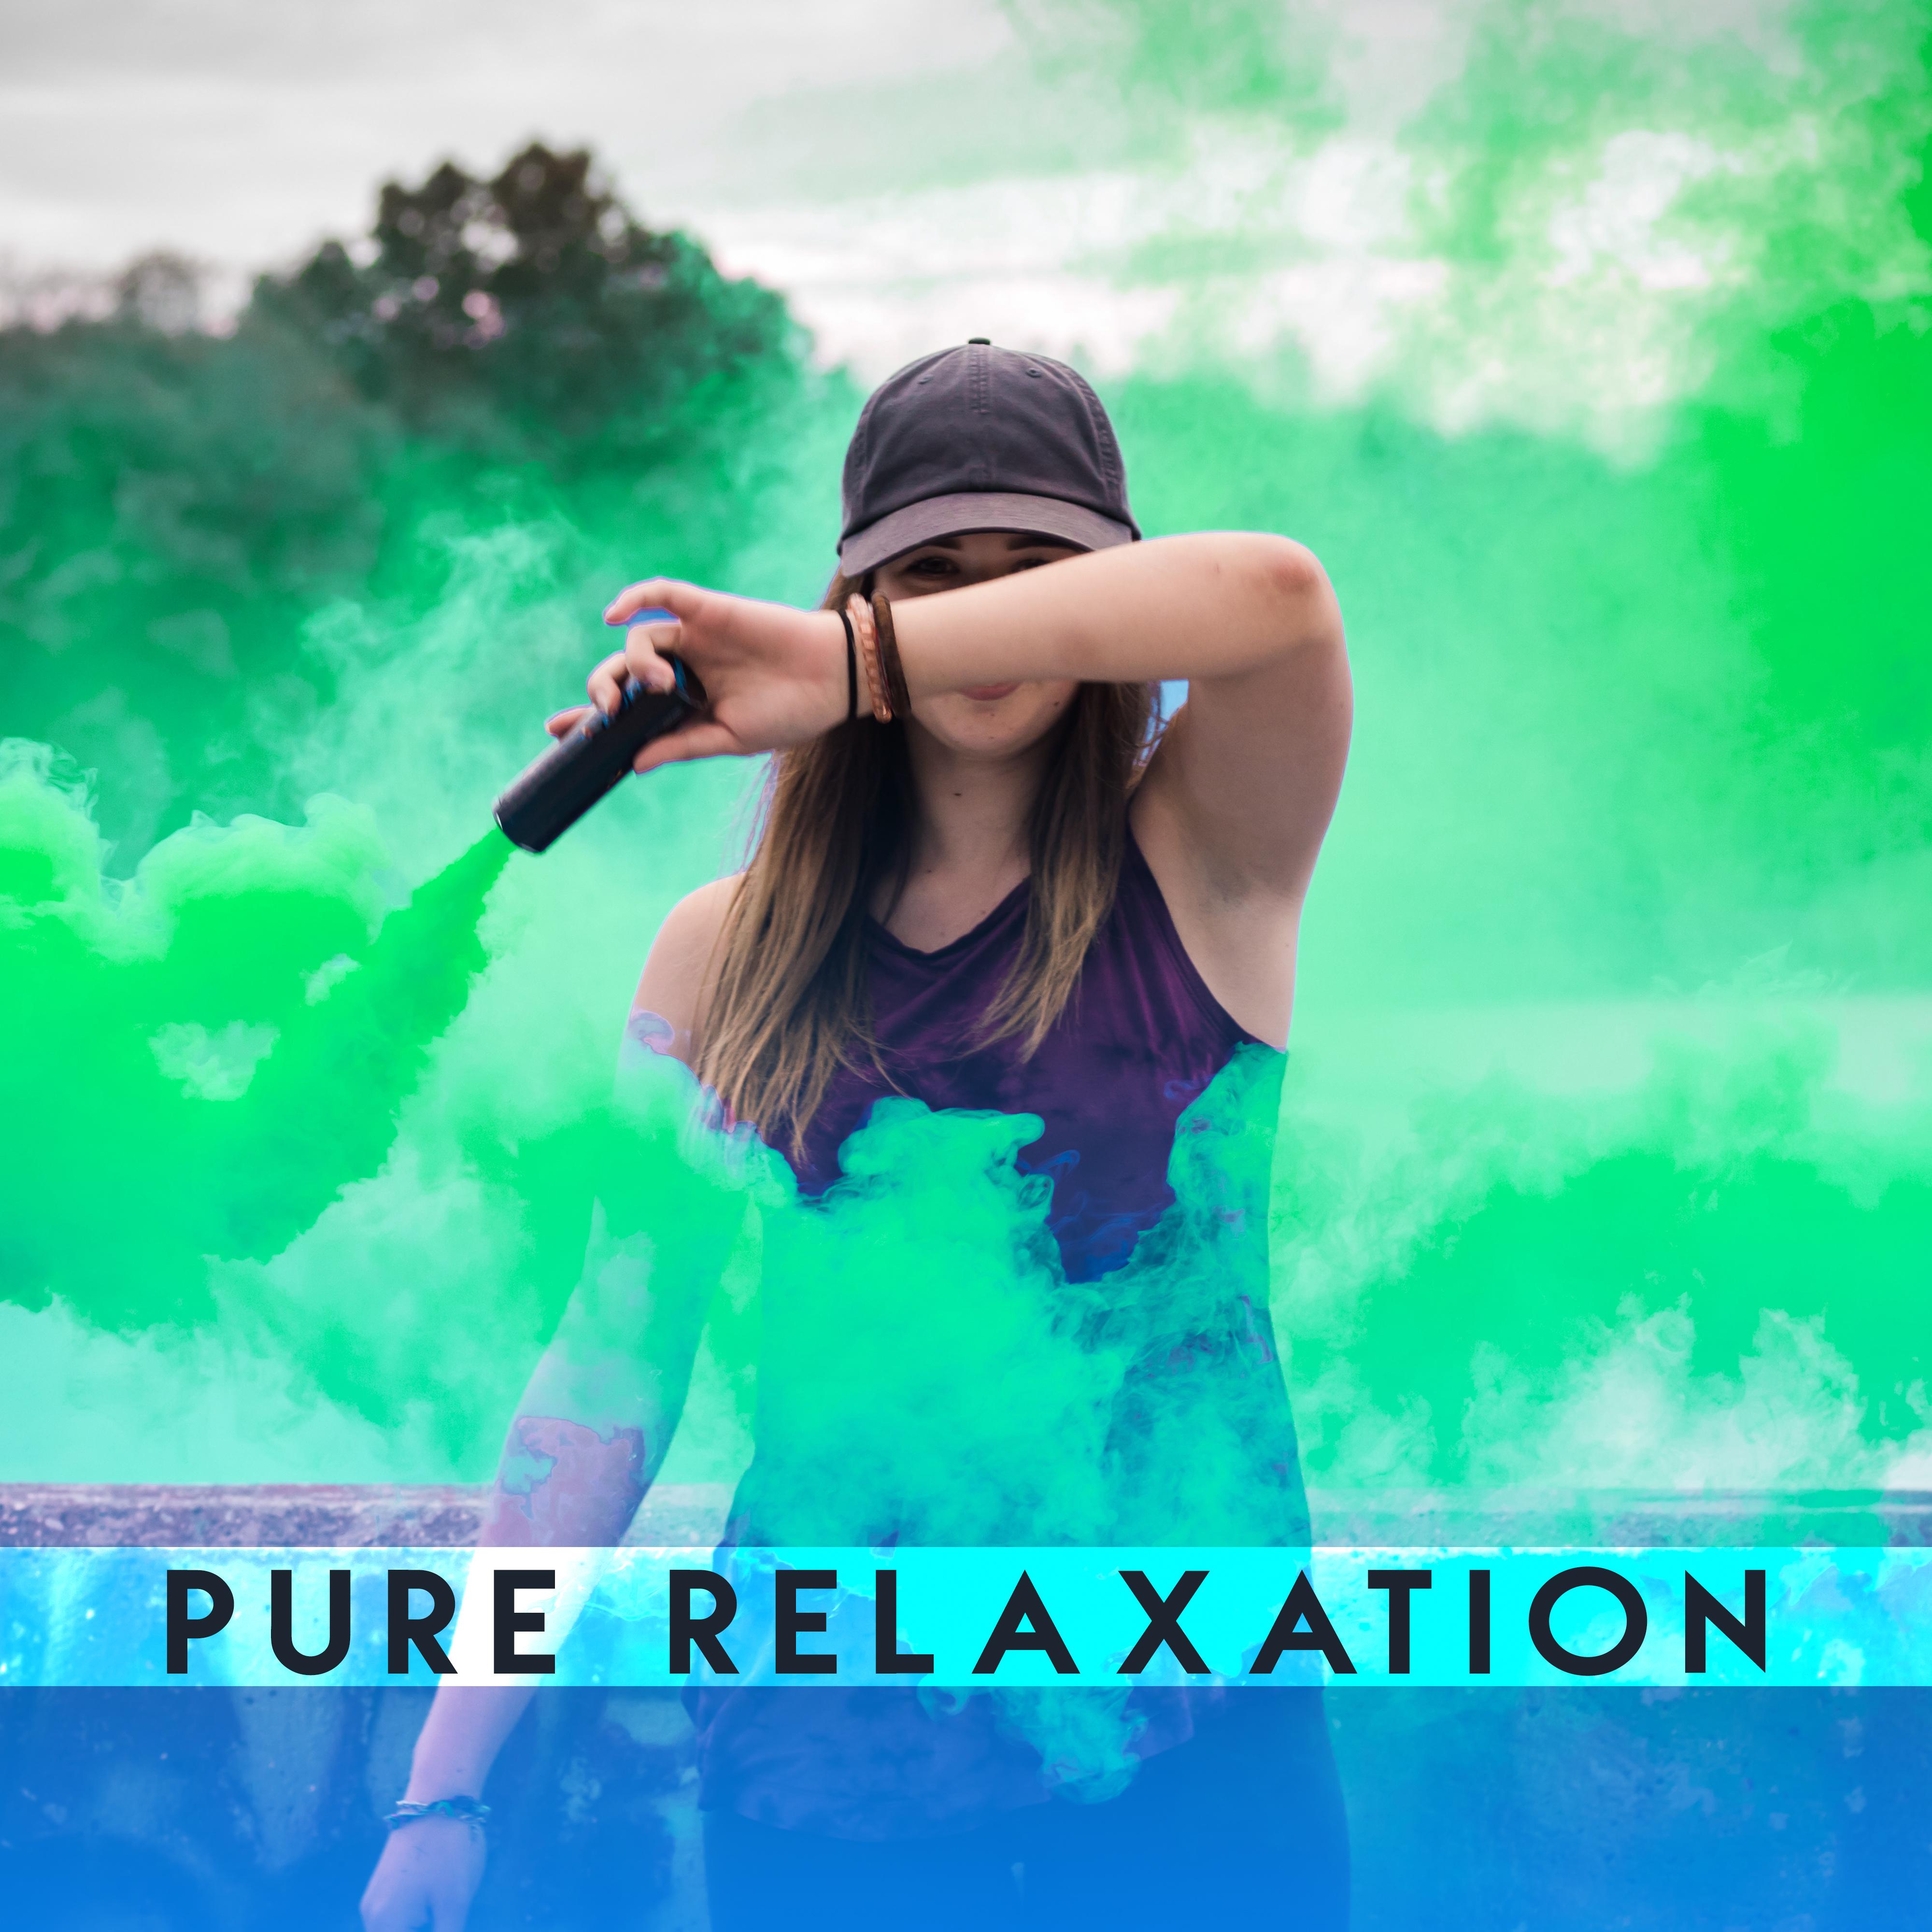 Pure Relaxation – New Age Music to Rest, Good Energy, Calm Down, Stress Relief, Deep Sleep, Meditation, Peaceful Mind, Anti Stress Sounds